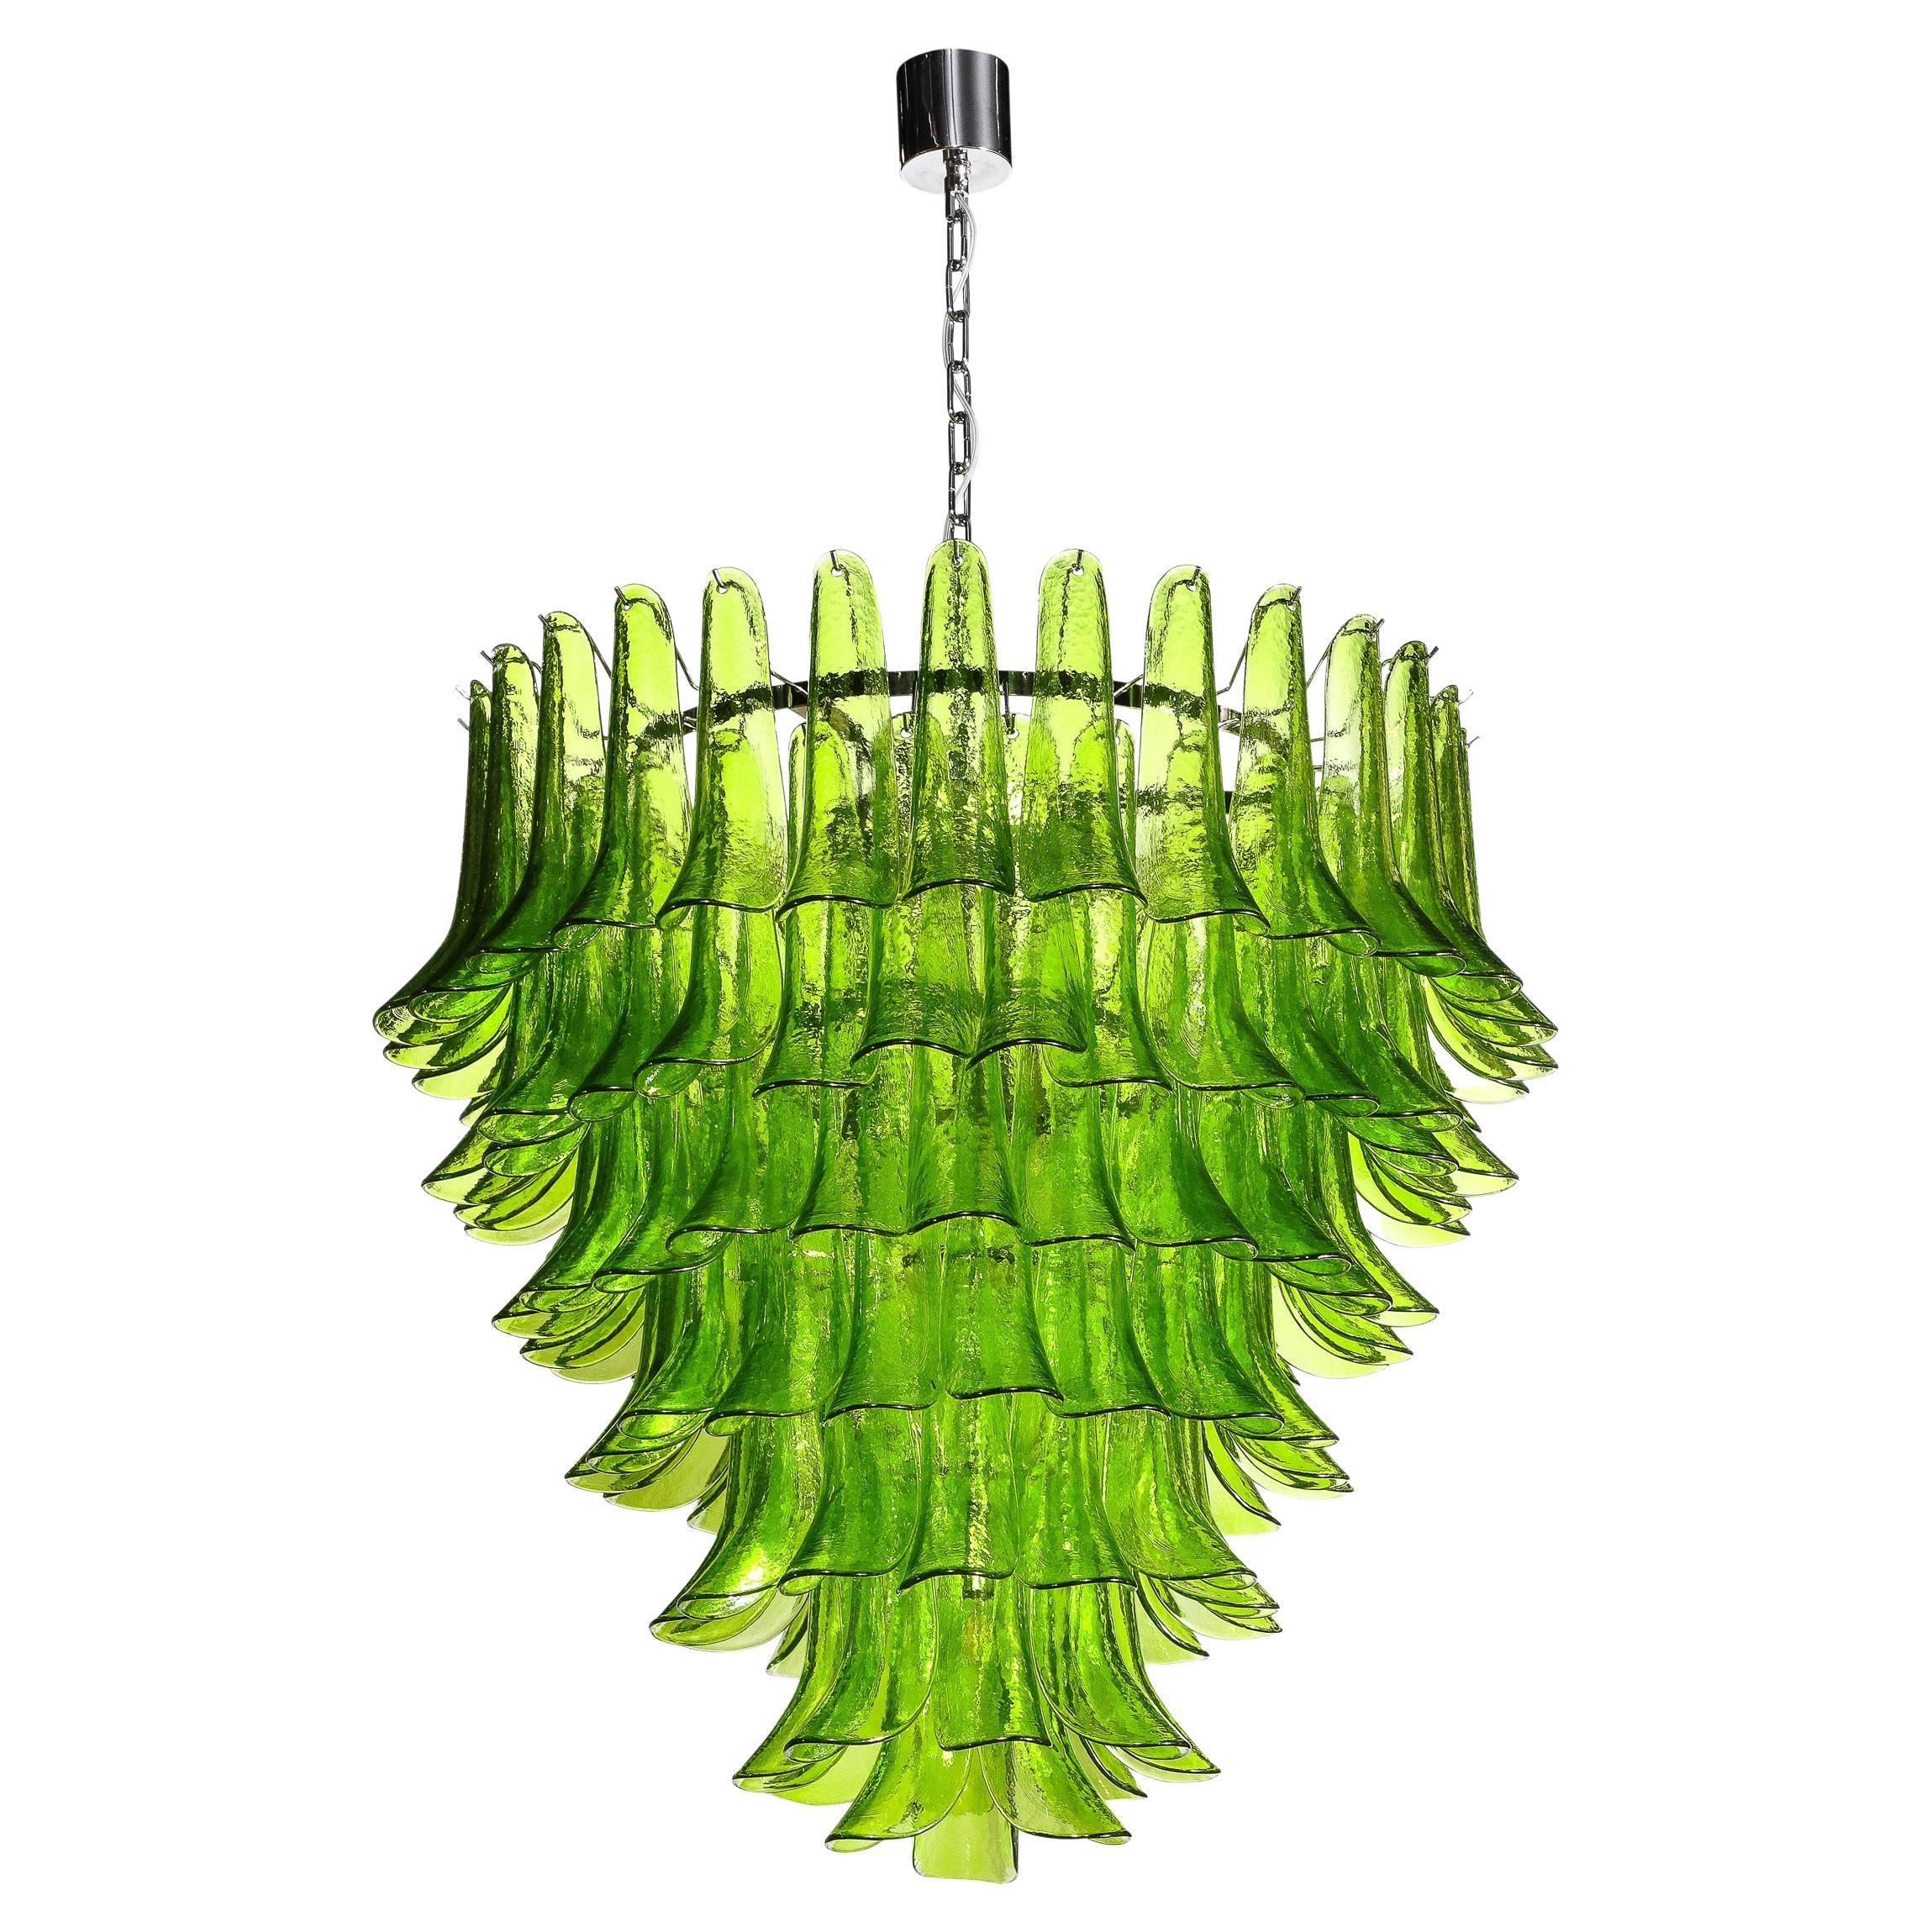 Modernist Hand-Blown Peridot Murano Glass Feather Chandelier w/ Chrome Fittings